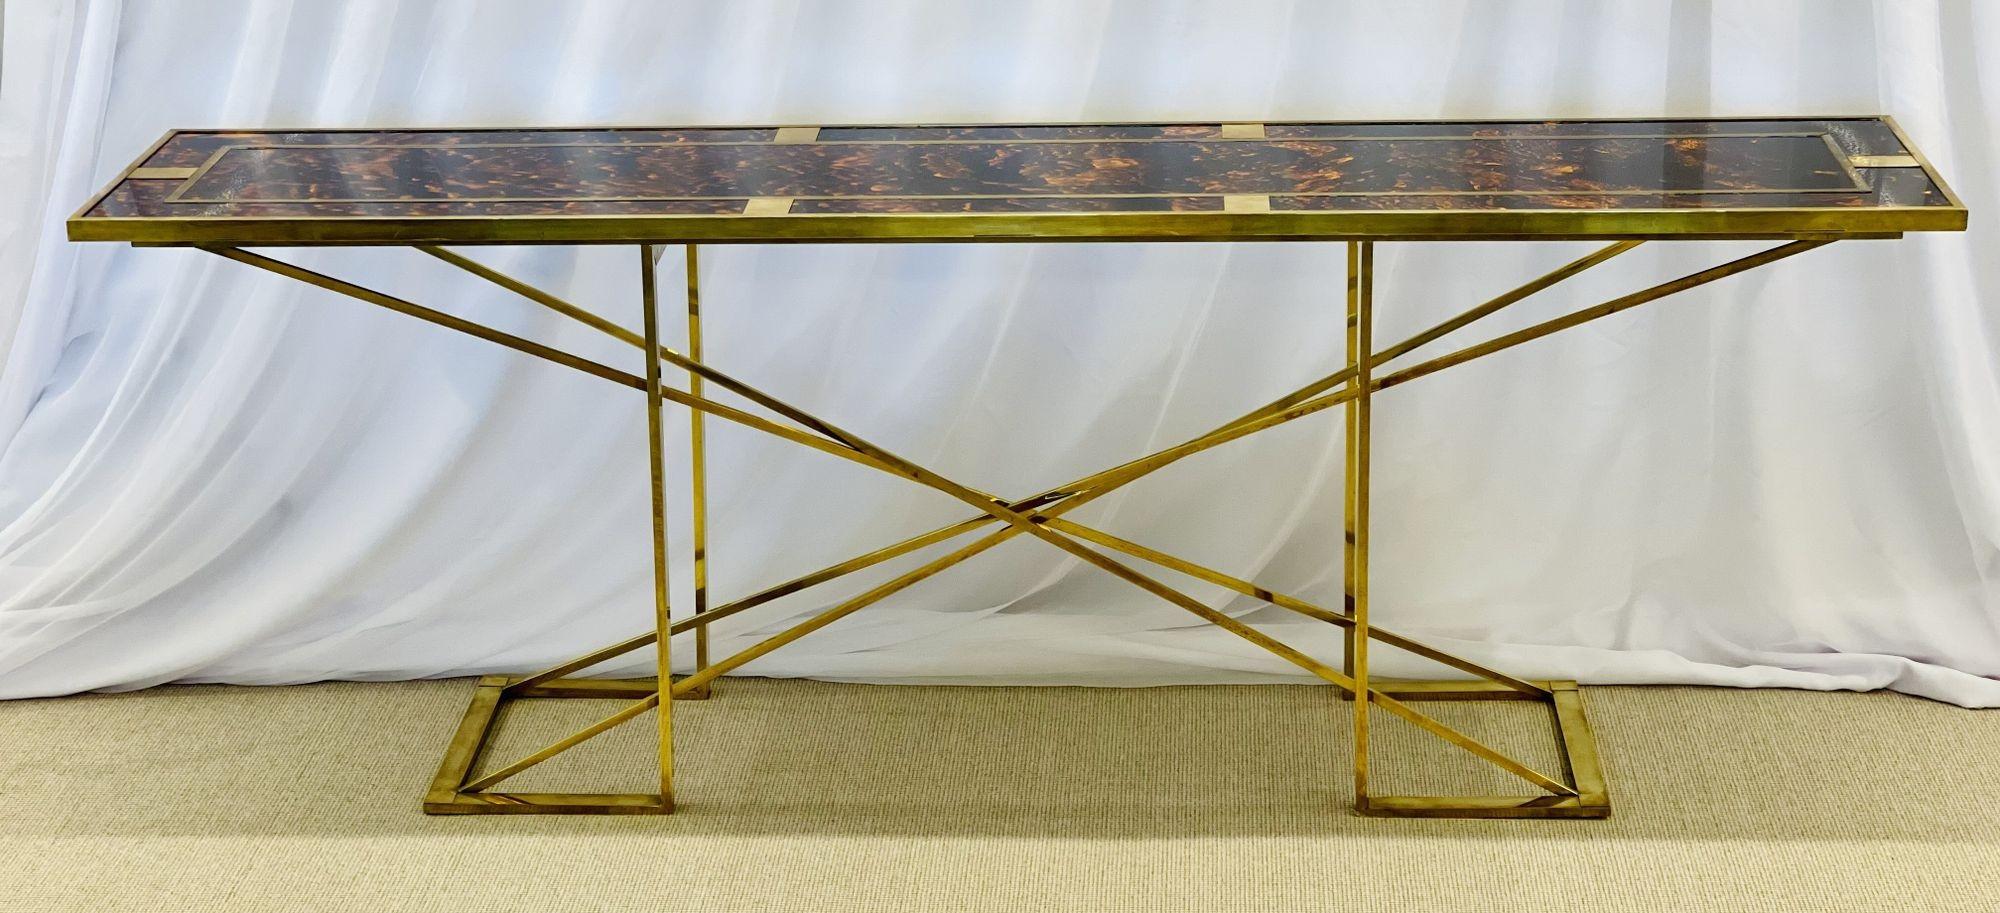 20th Century Romeo Rega Console Table, Faux Tortoise Top, Gilt Metal Base, Italy, 1970s For Sale